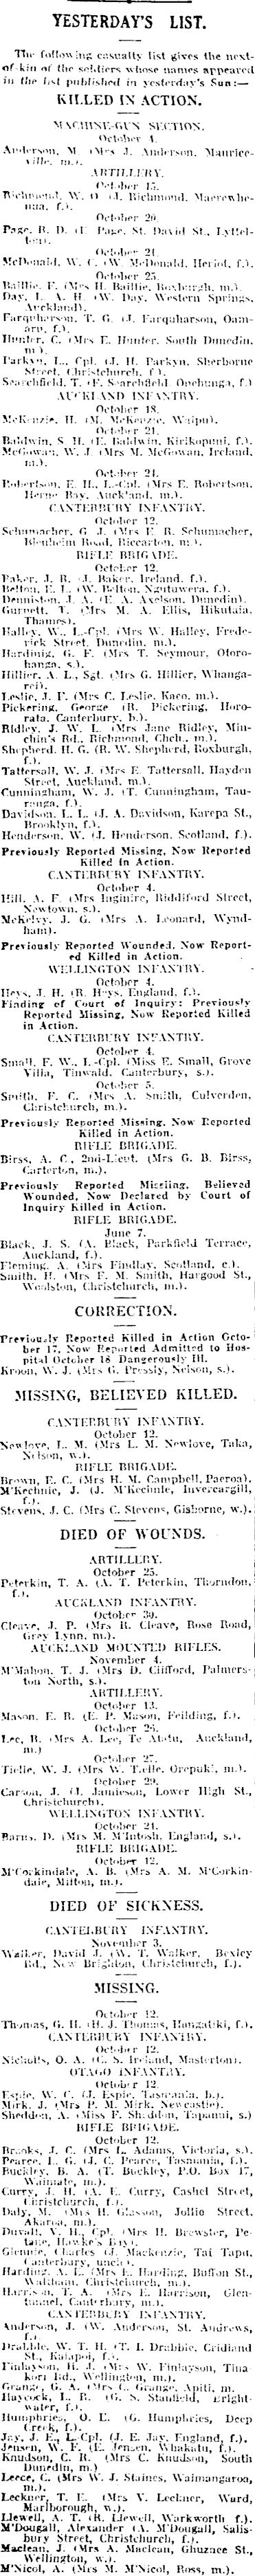 Papers Past Newspapers Sun Christchurch 9 November 1917 Casualties